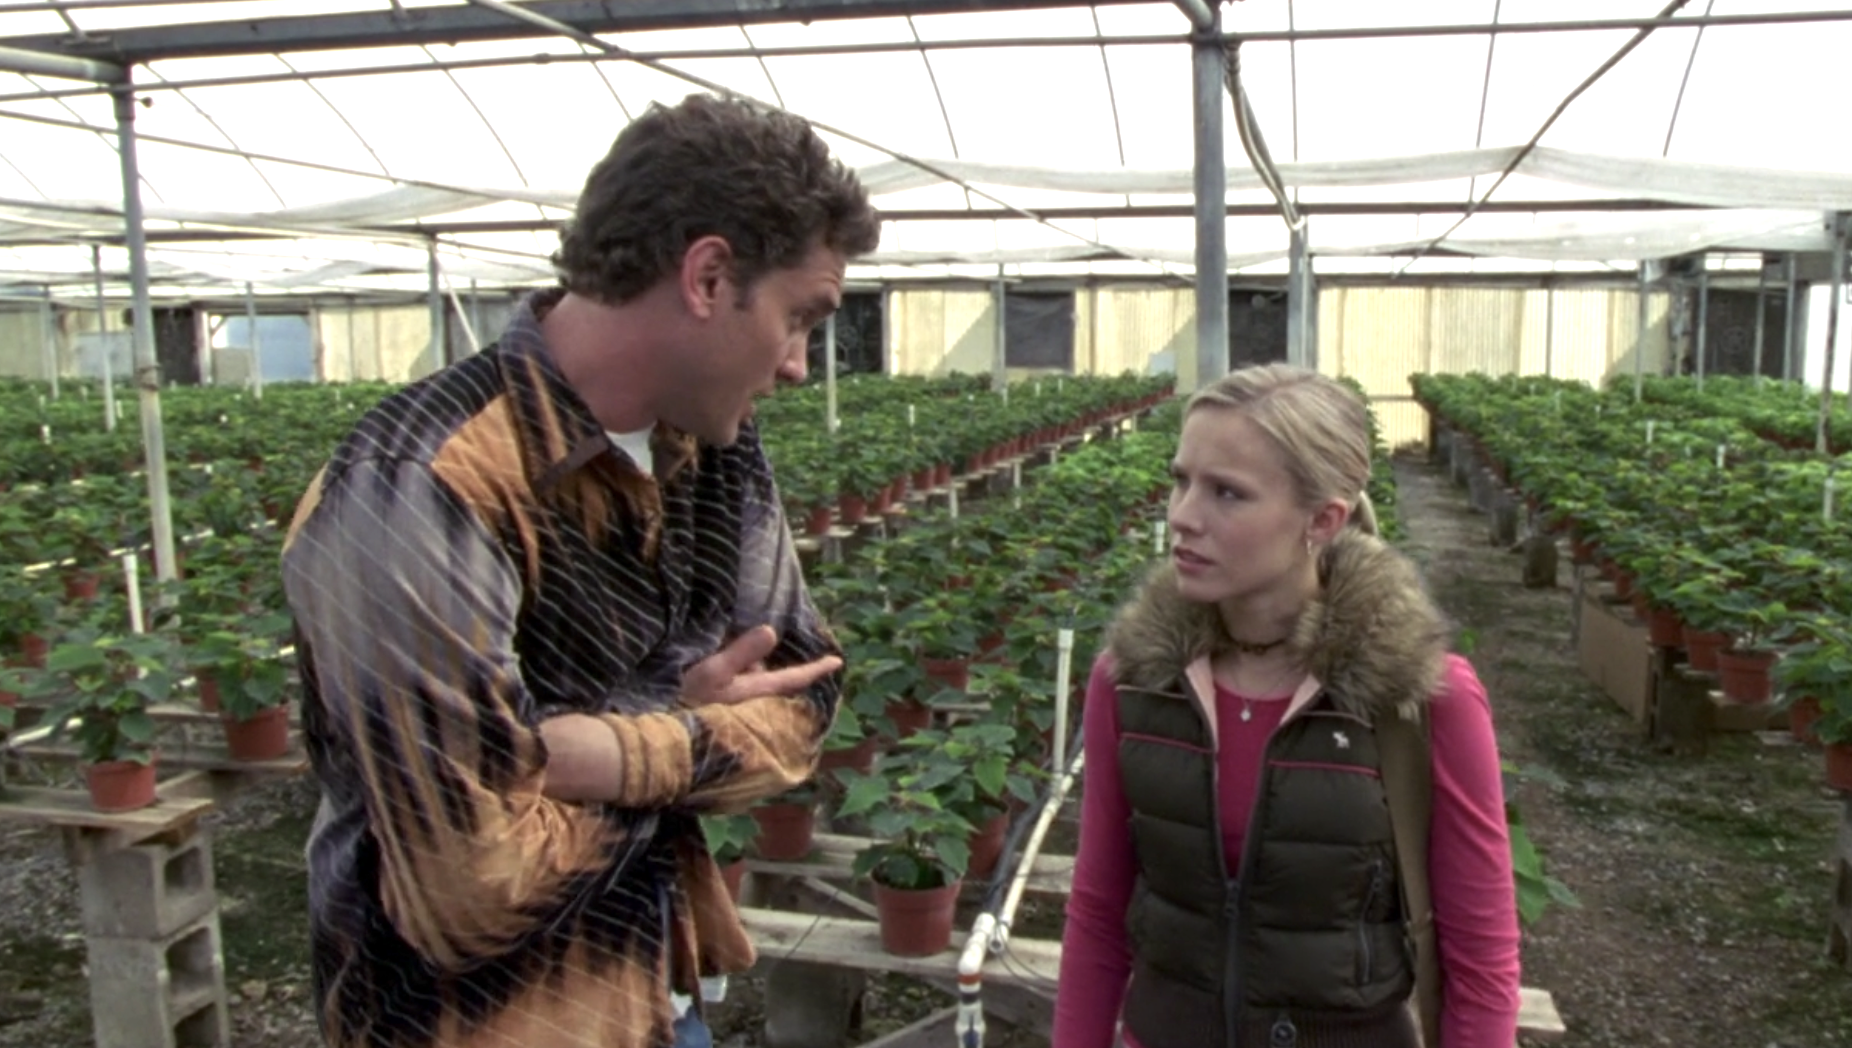 Screenshot of S1E9 of Veronica Mars. Josh and Veronica stand in a greenhouse with rows of green plants behind them. Josh is wearing an orange and gray button down shirt and look at Veronica who is wearing a pink longsleeved shirt and a brown vest with a fur color and looking at Josh with skepticism.